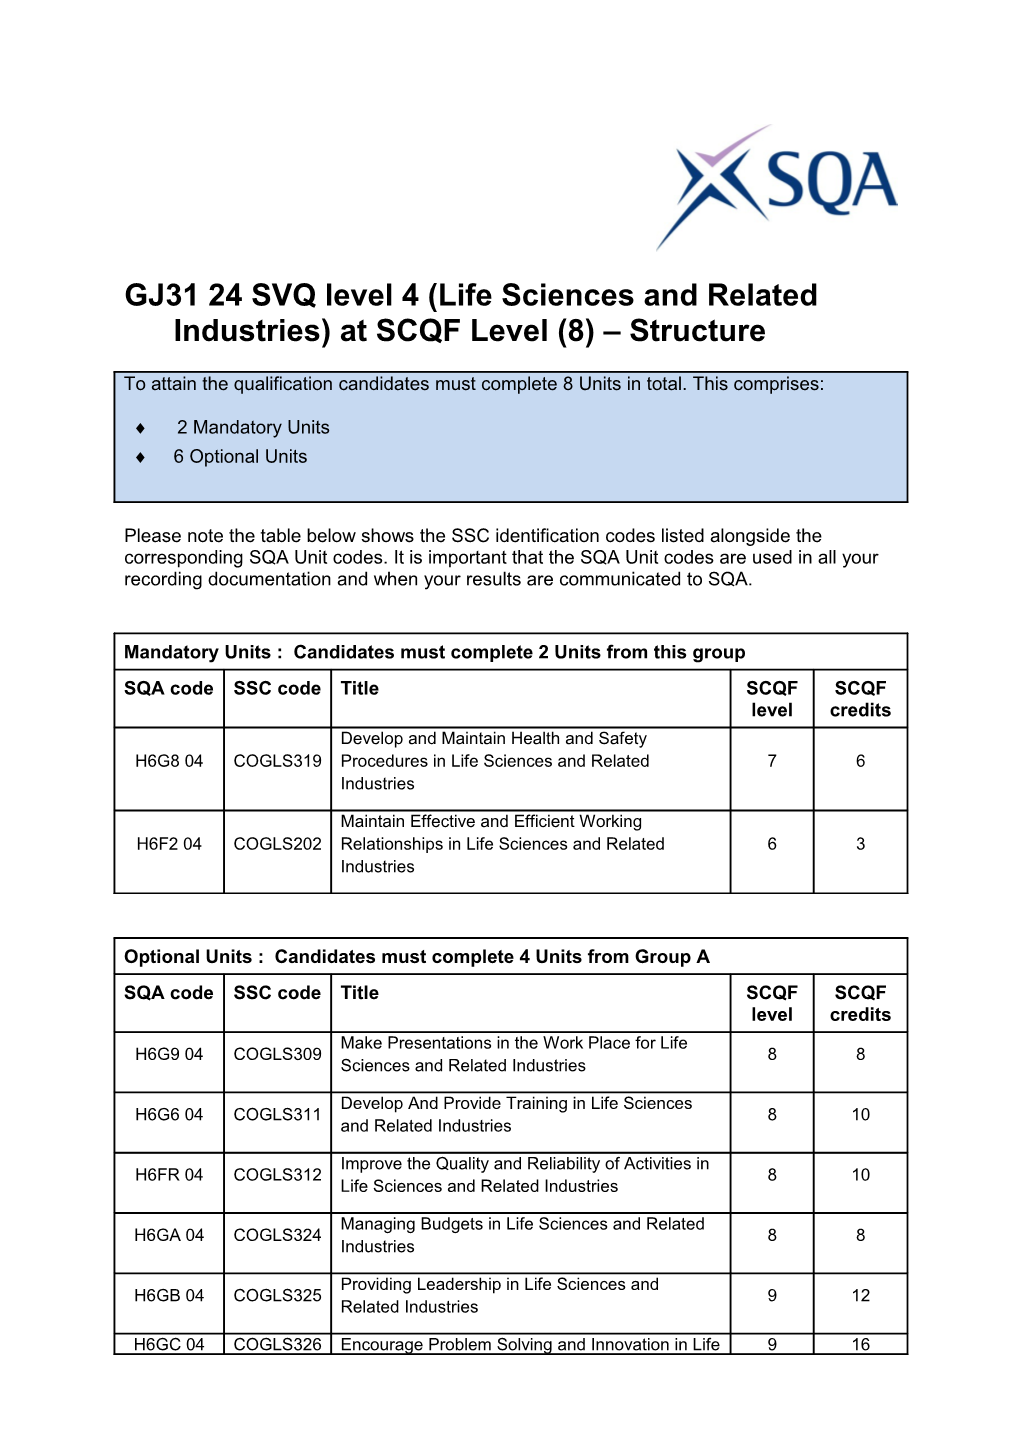 GJ31 24 SVQ Level 4 (Life Sciences and Related Industries) at SCQF Level (8) Structure